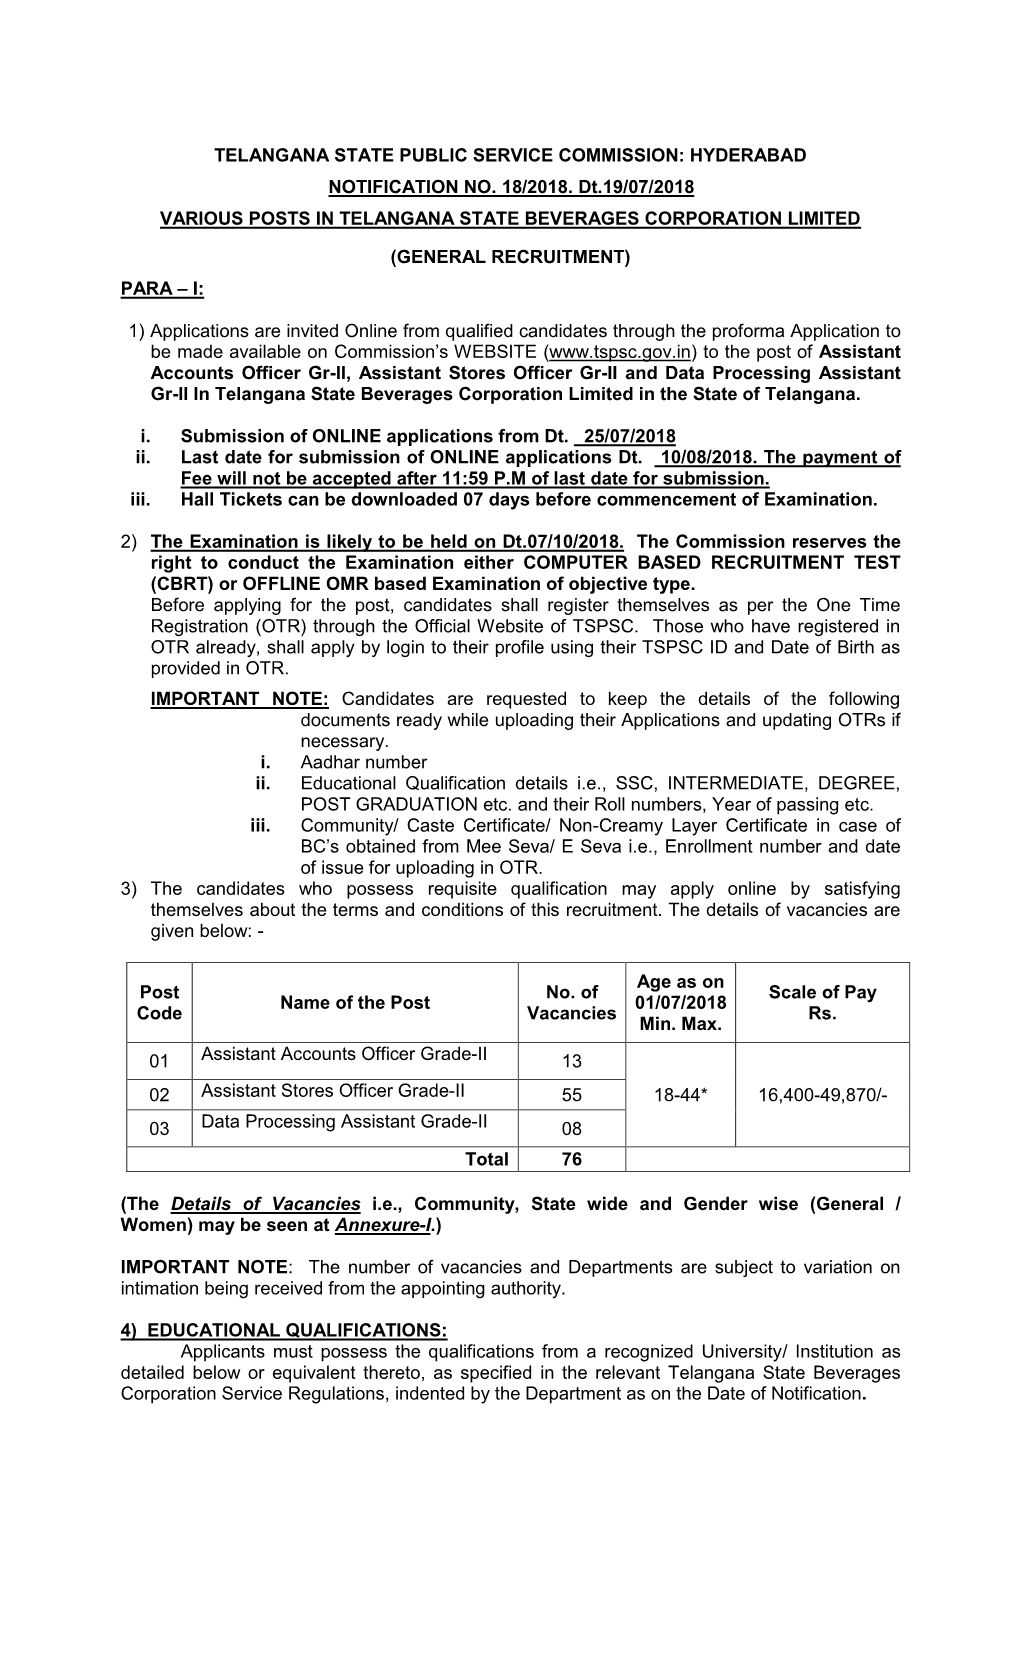 NOTIFICATION NO. 18/2018 , Dt. 19/07/2018 VARIOUS